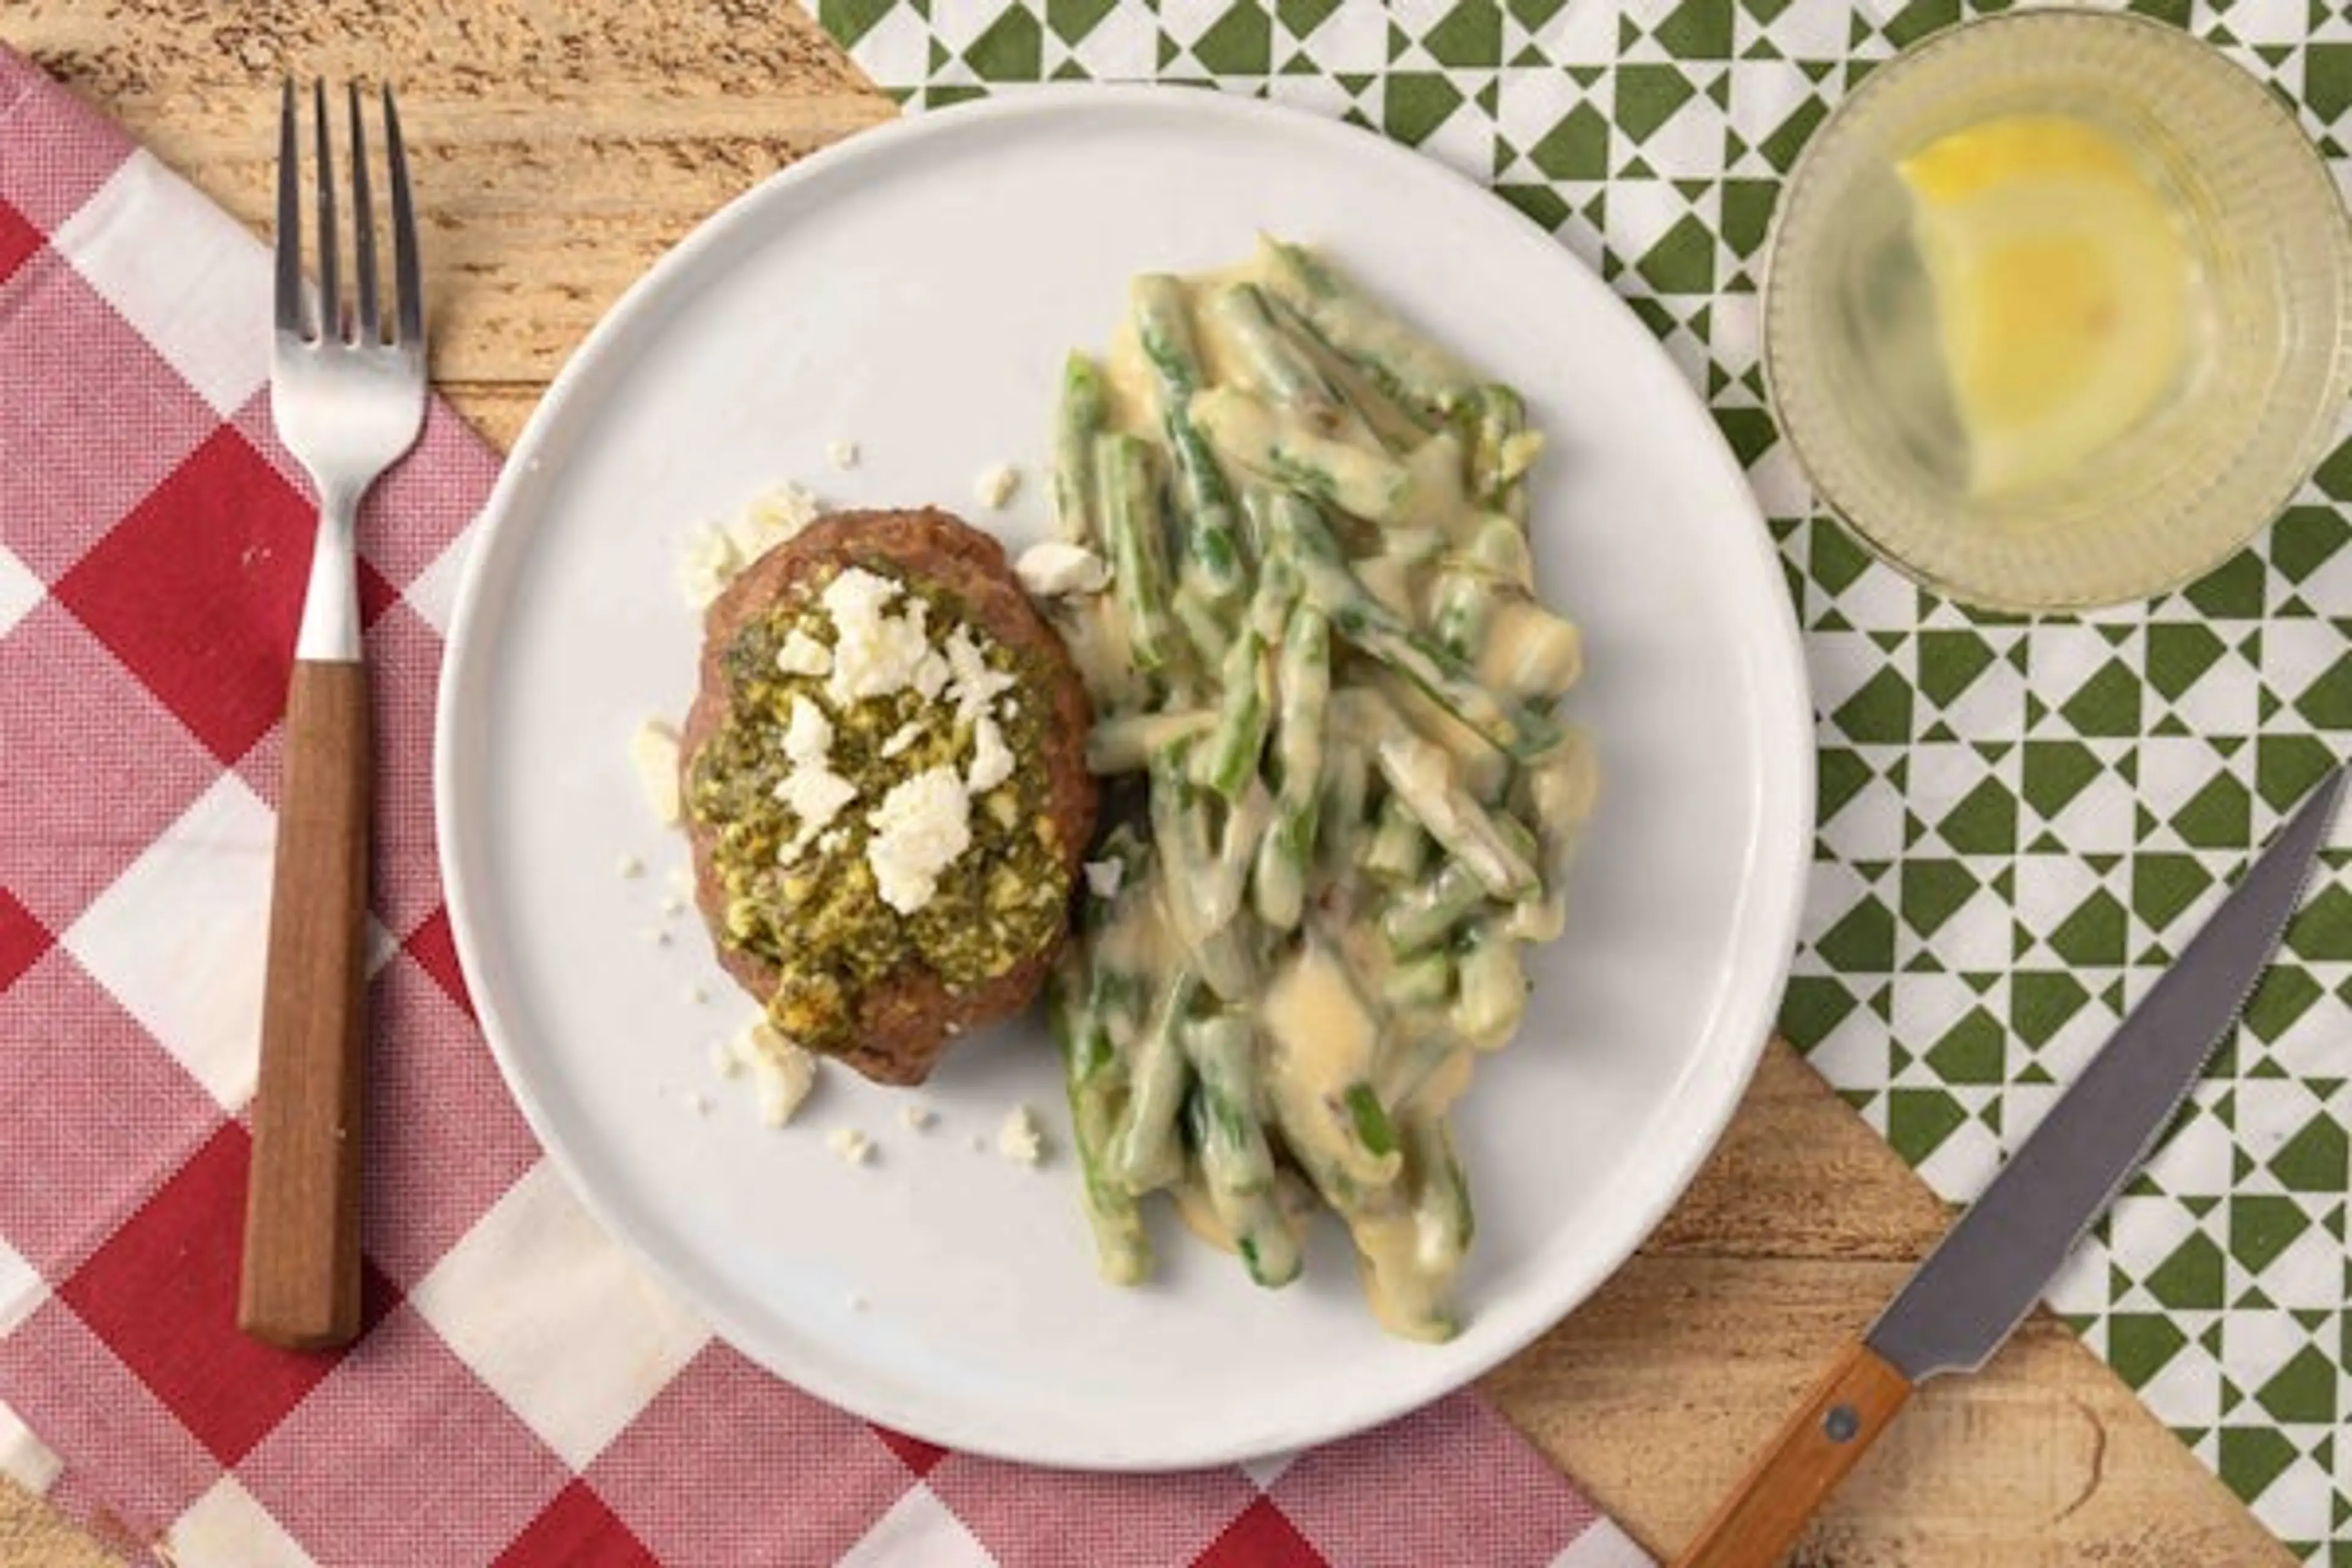 Pesto and Feta Turkey Meatloaf with cheesy green beans